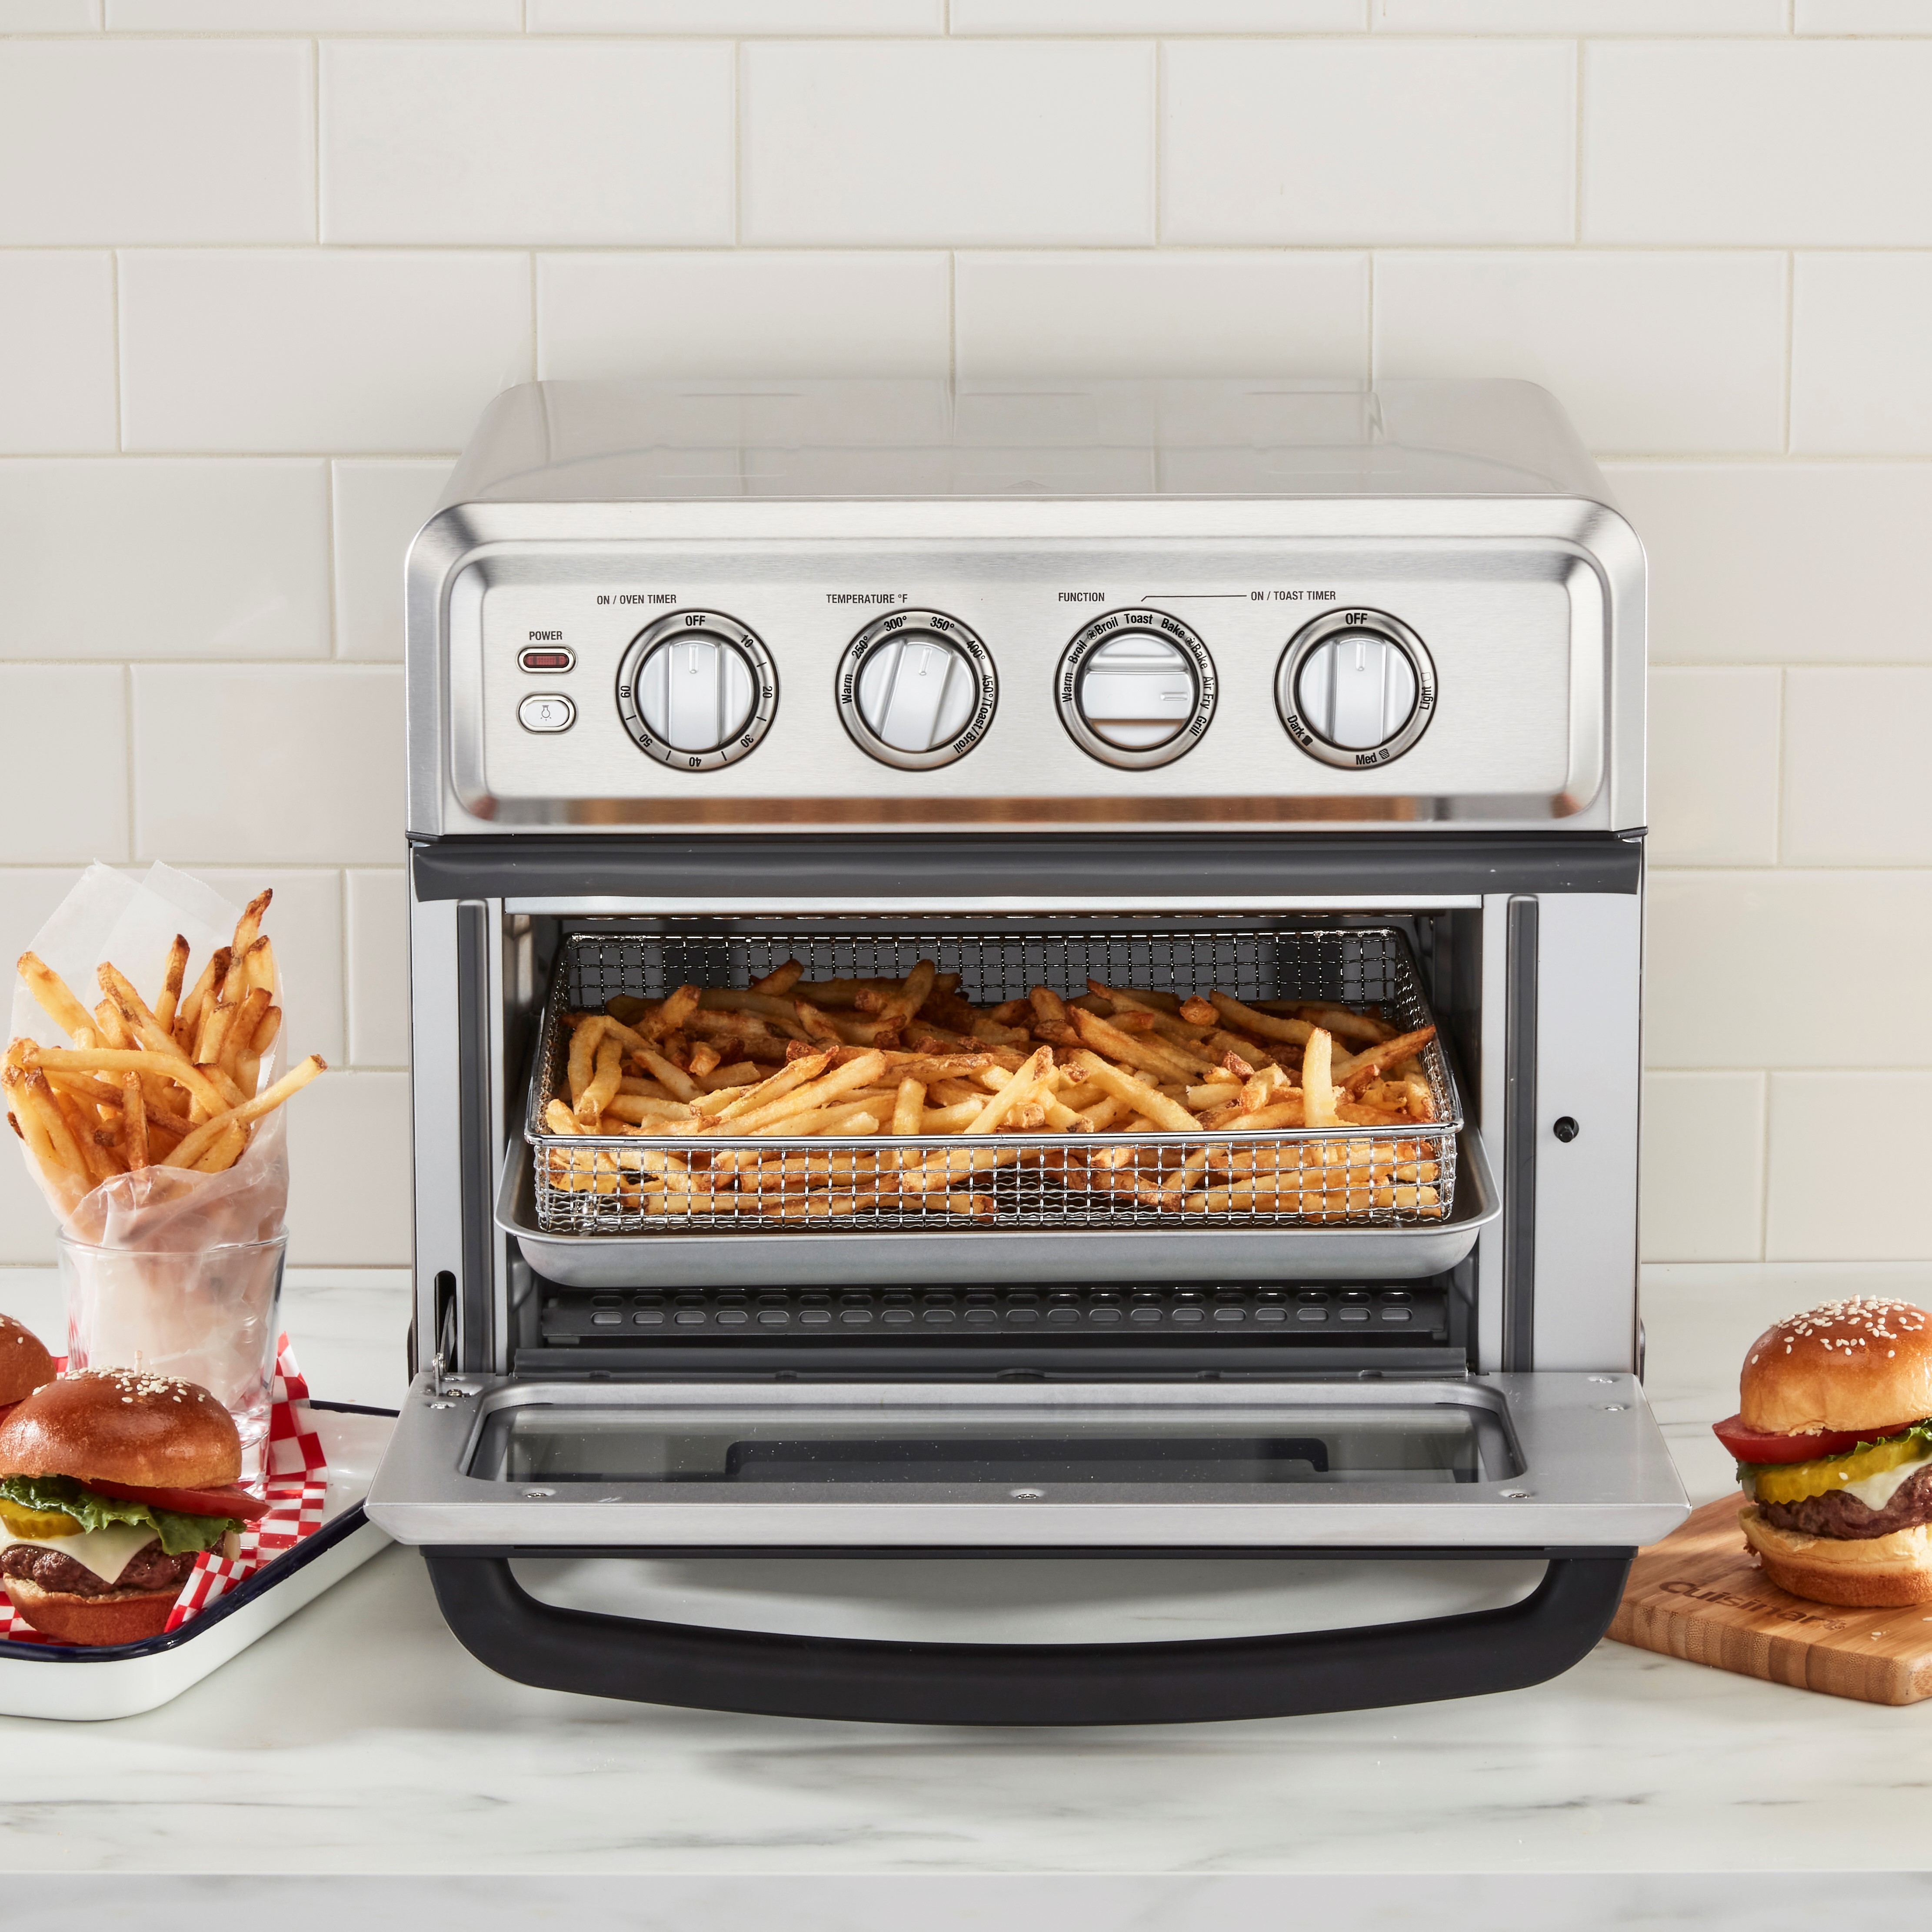 Cuisinart AirFryer Toaster Oven reviews: Here's what people are saying